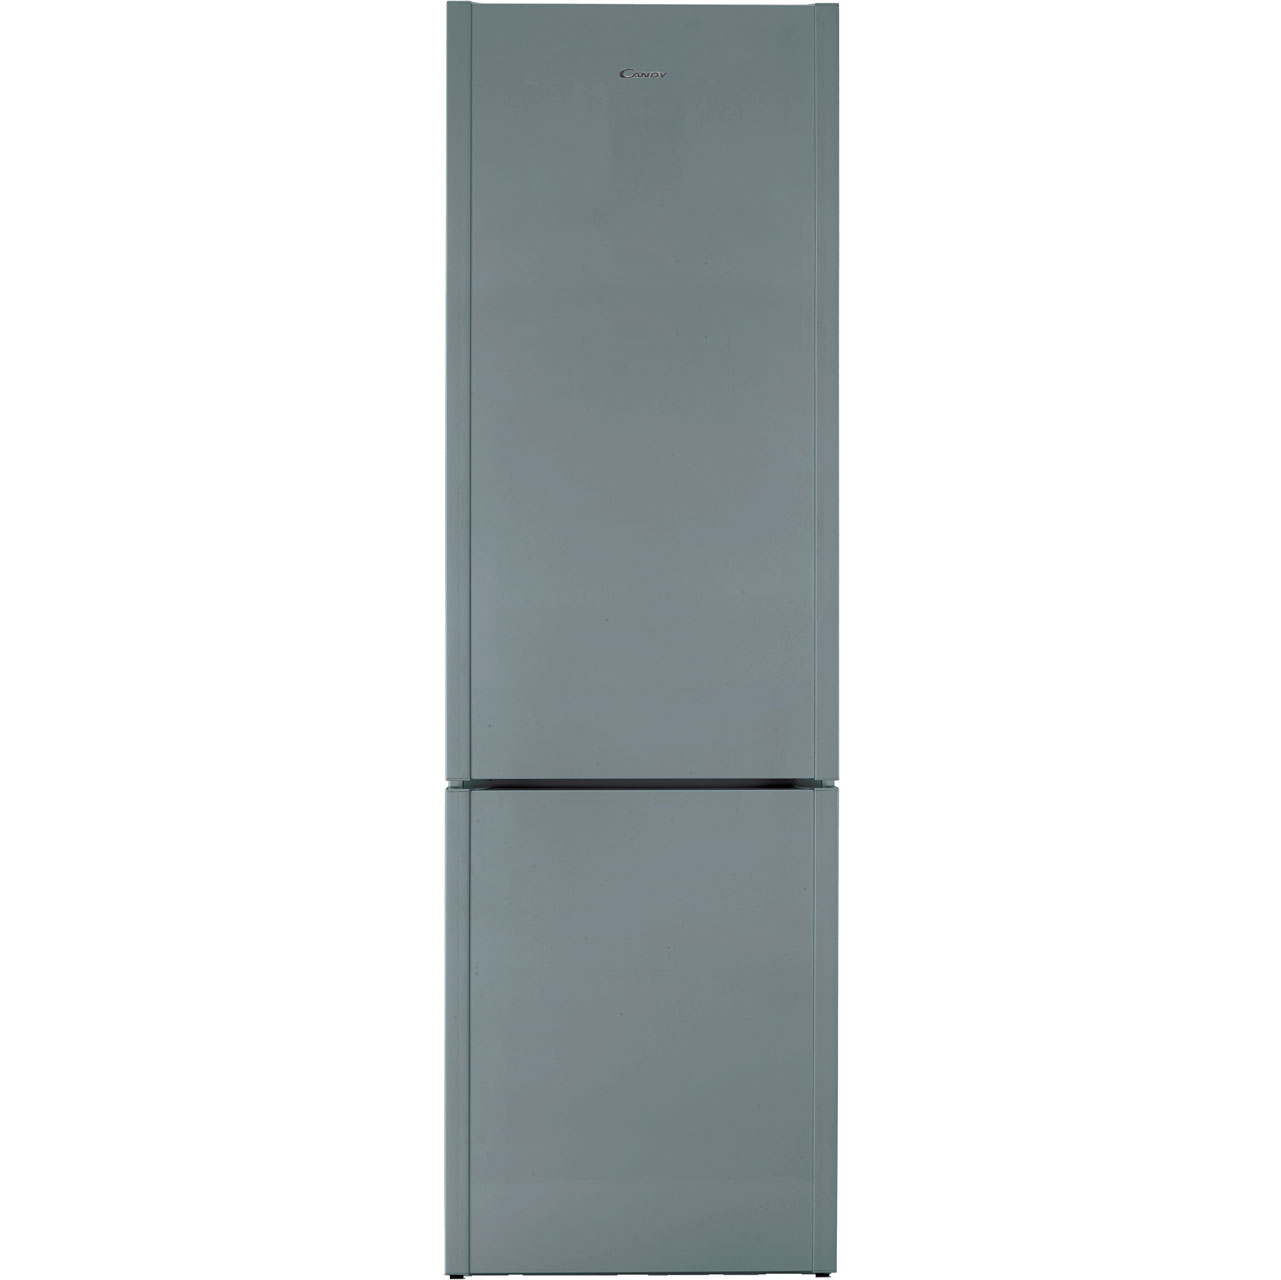 Candy CCPF6182X Free Standing Fridge Freezer Frost Free in Stainless Steel